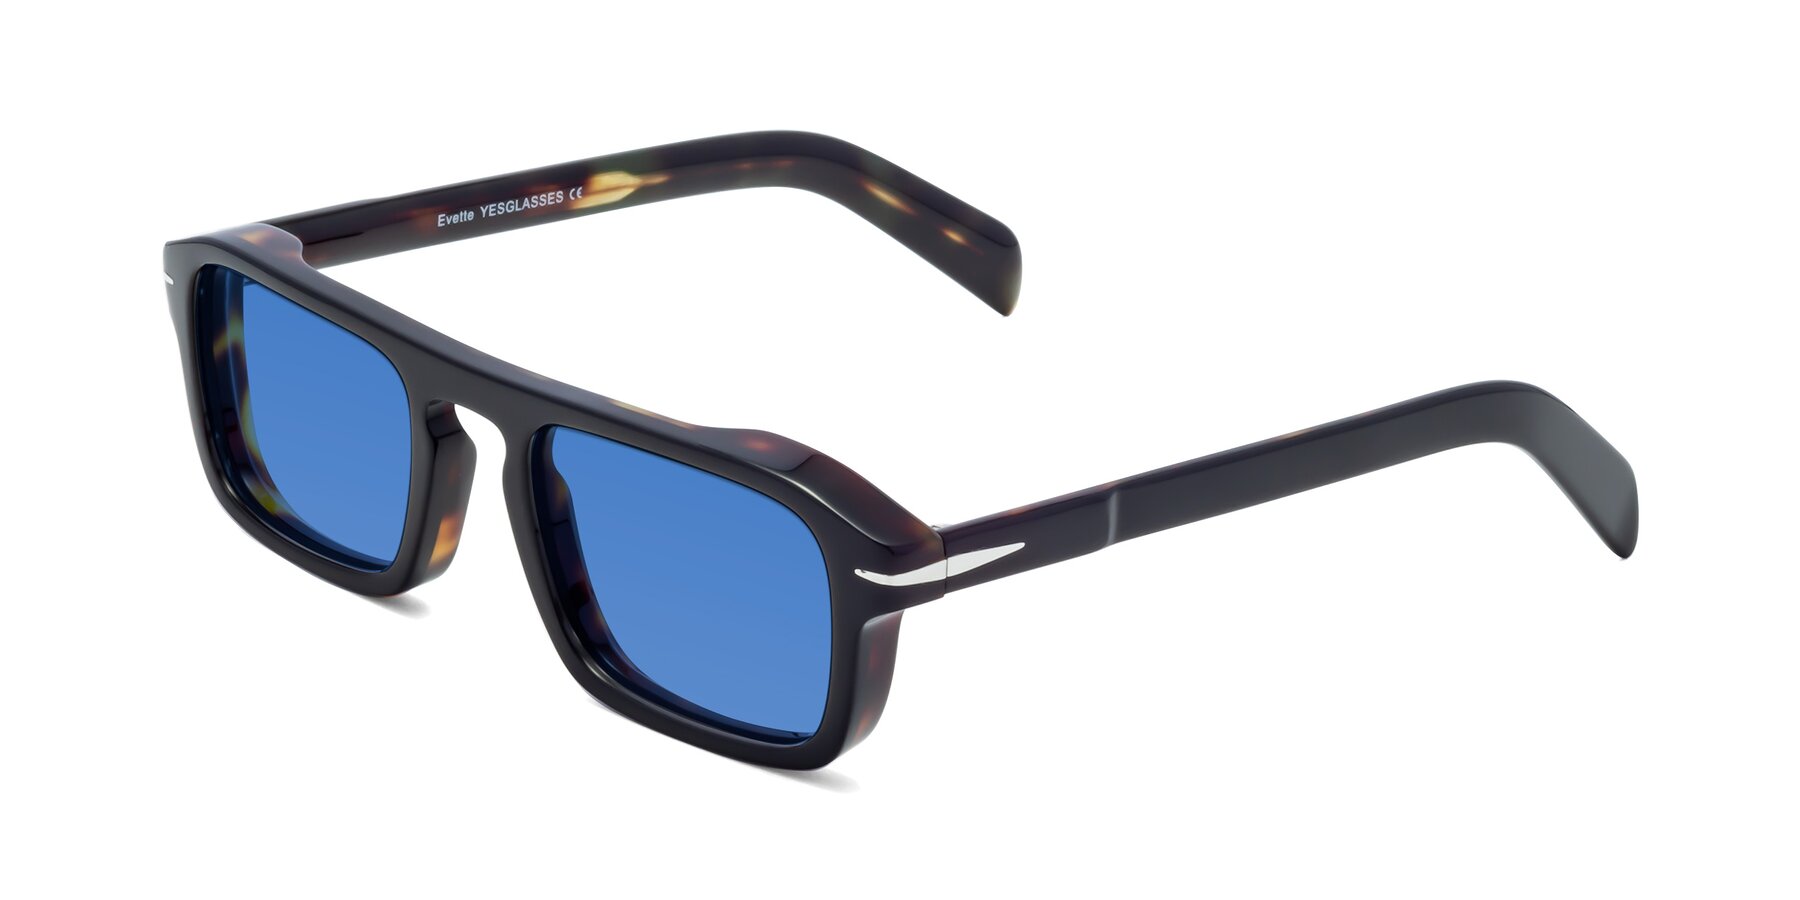 Angle of Evette in Black-Tortoise with Blue Tinted Lenses